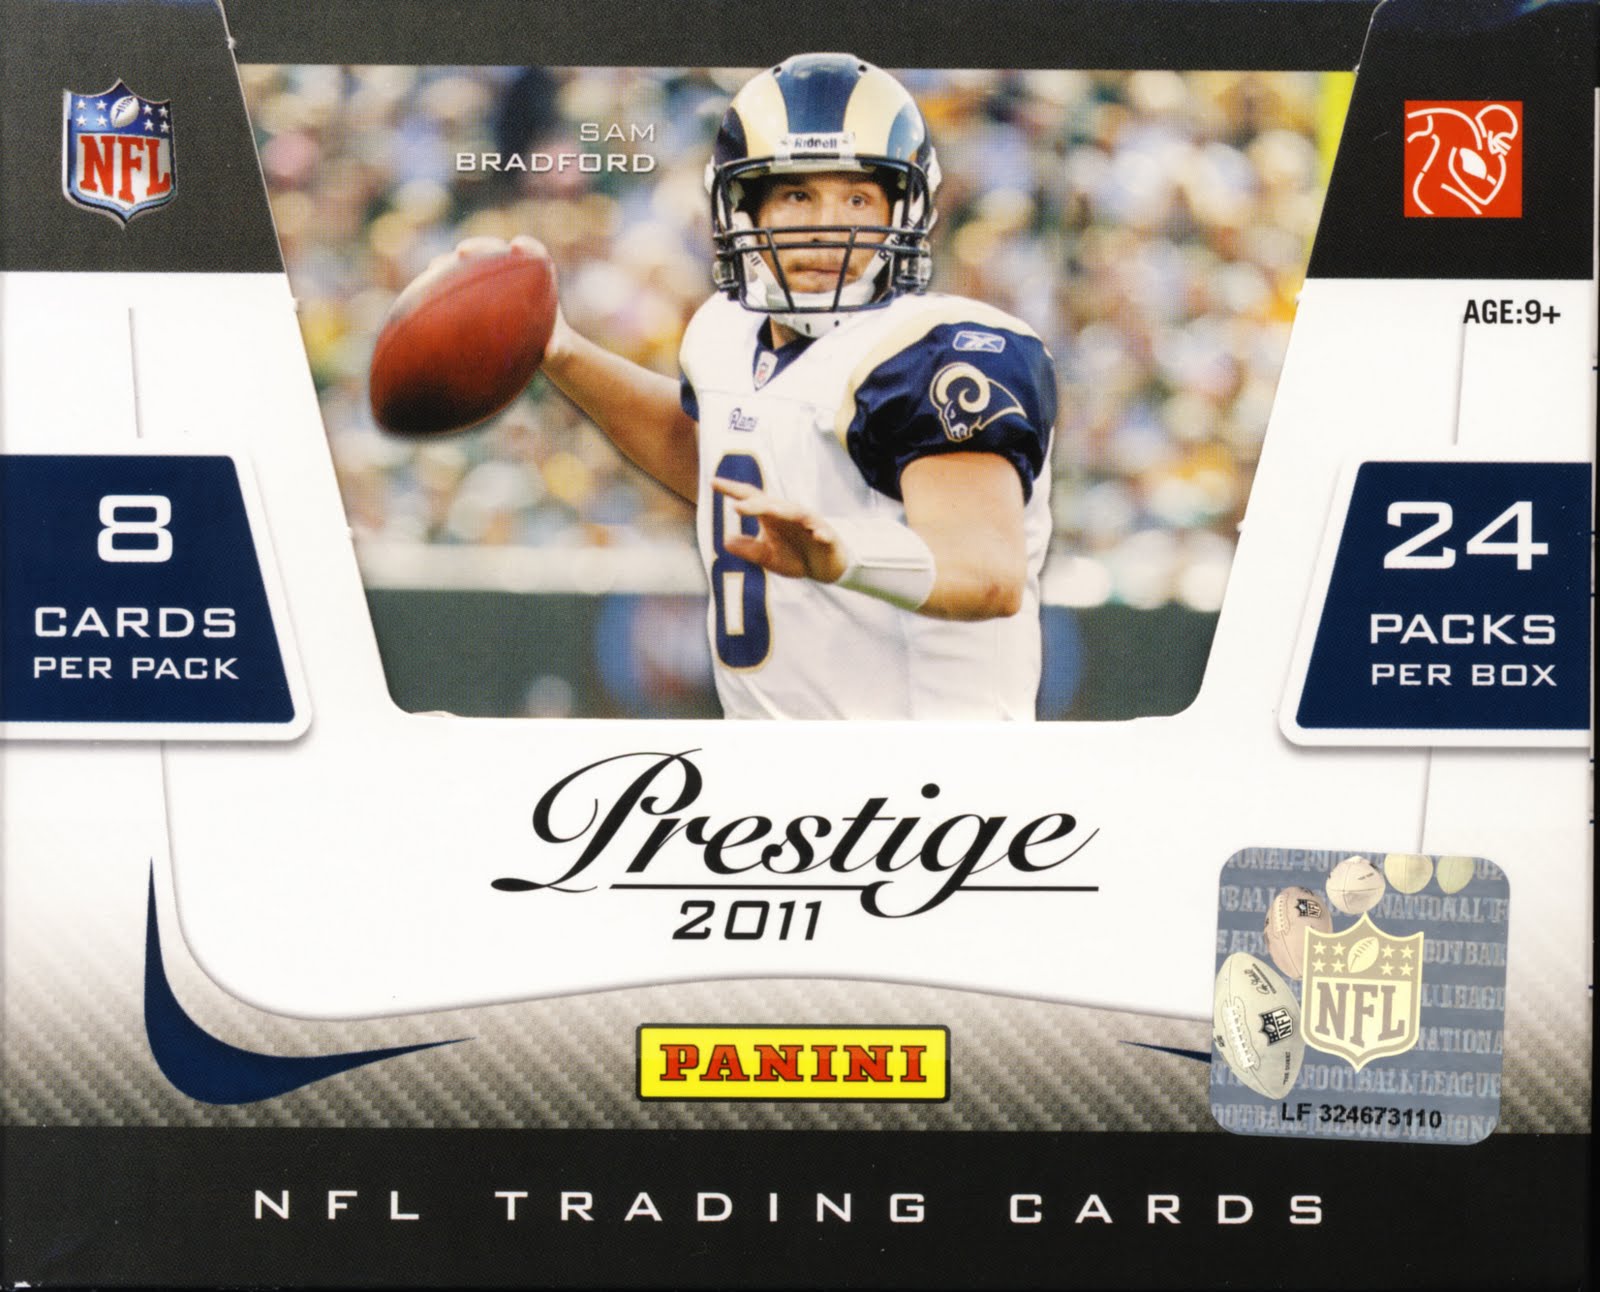 All About Cards Sports Card Reviews, Box Breaks, Checklists and News